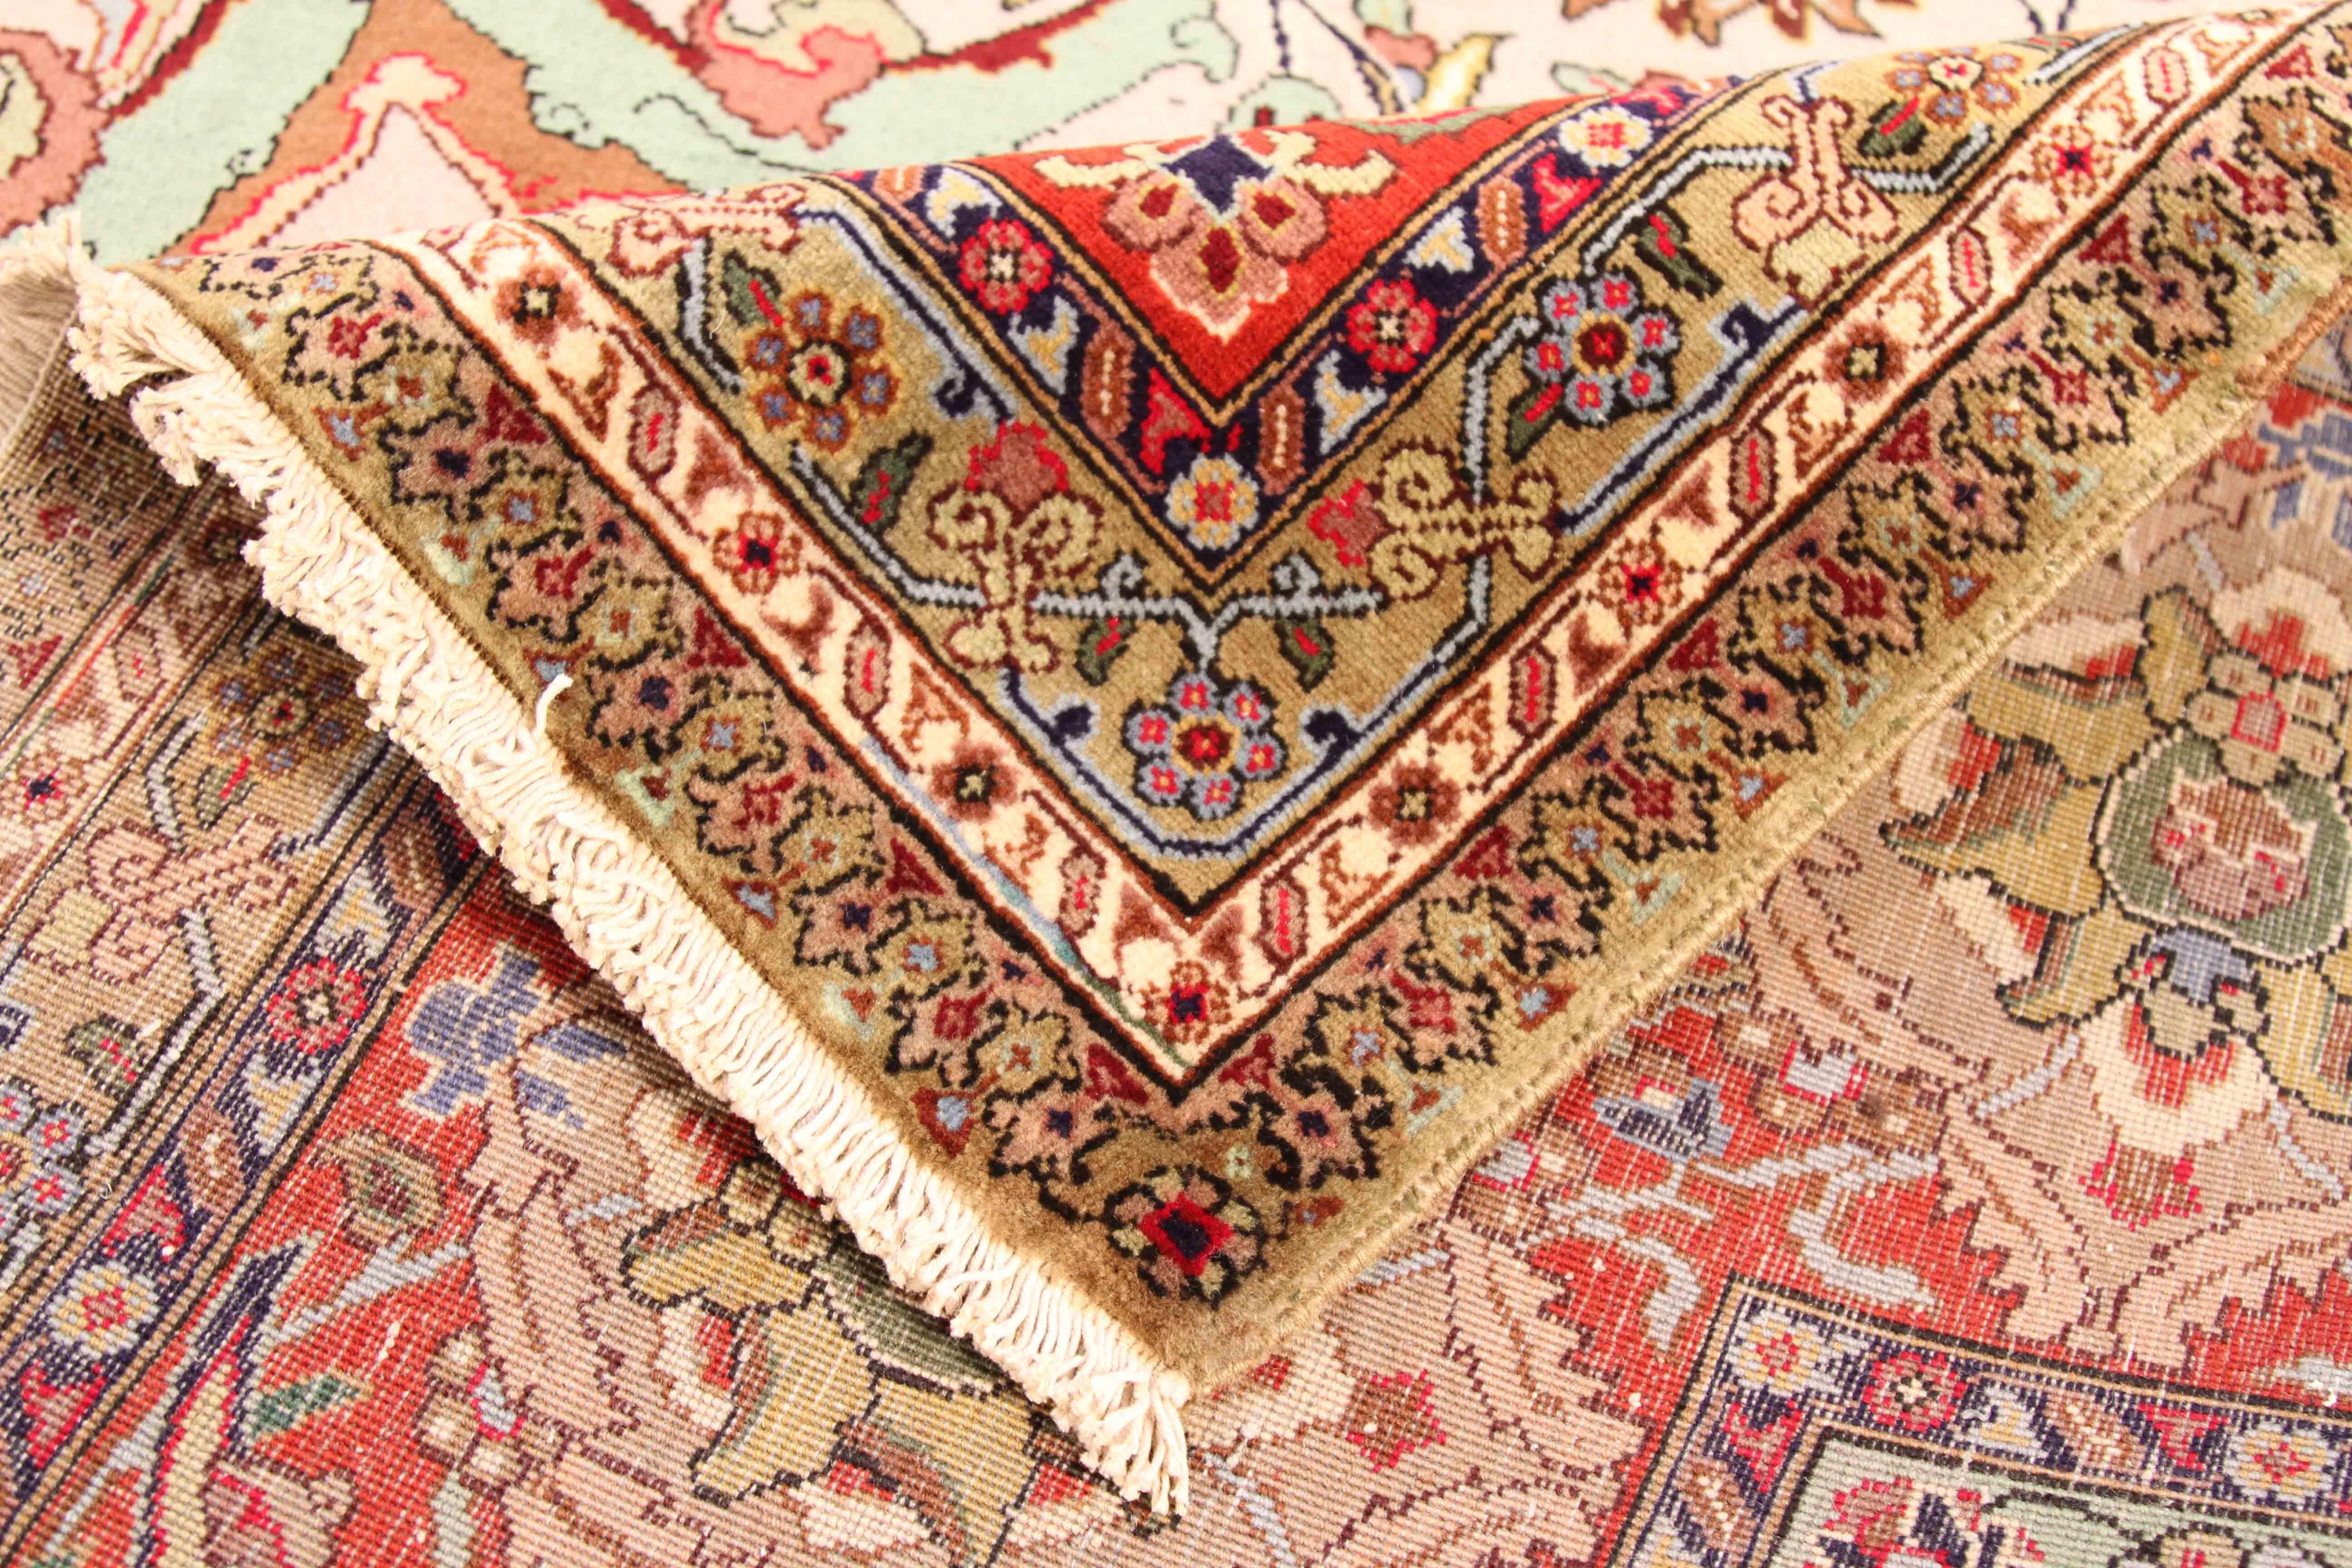 Antique Persian rug created in the 1960s by handweaving fine wool and coloring it with rich organic dyes. The design pattern featured on its field is an incredible mix of floral details in ivory, red and pink. It’s a style that has made Persian rugs